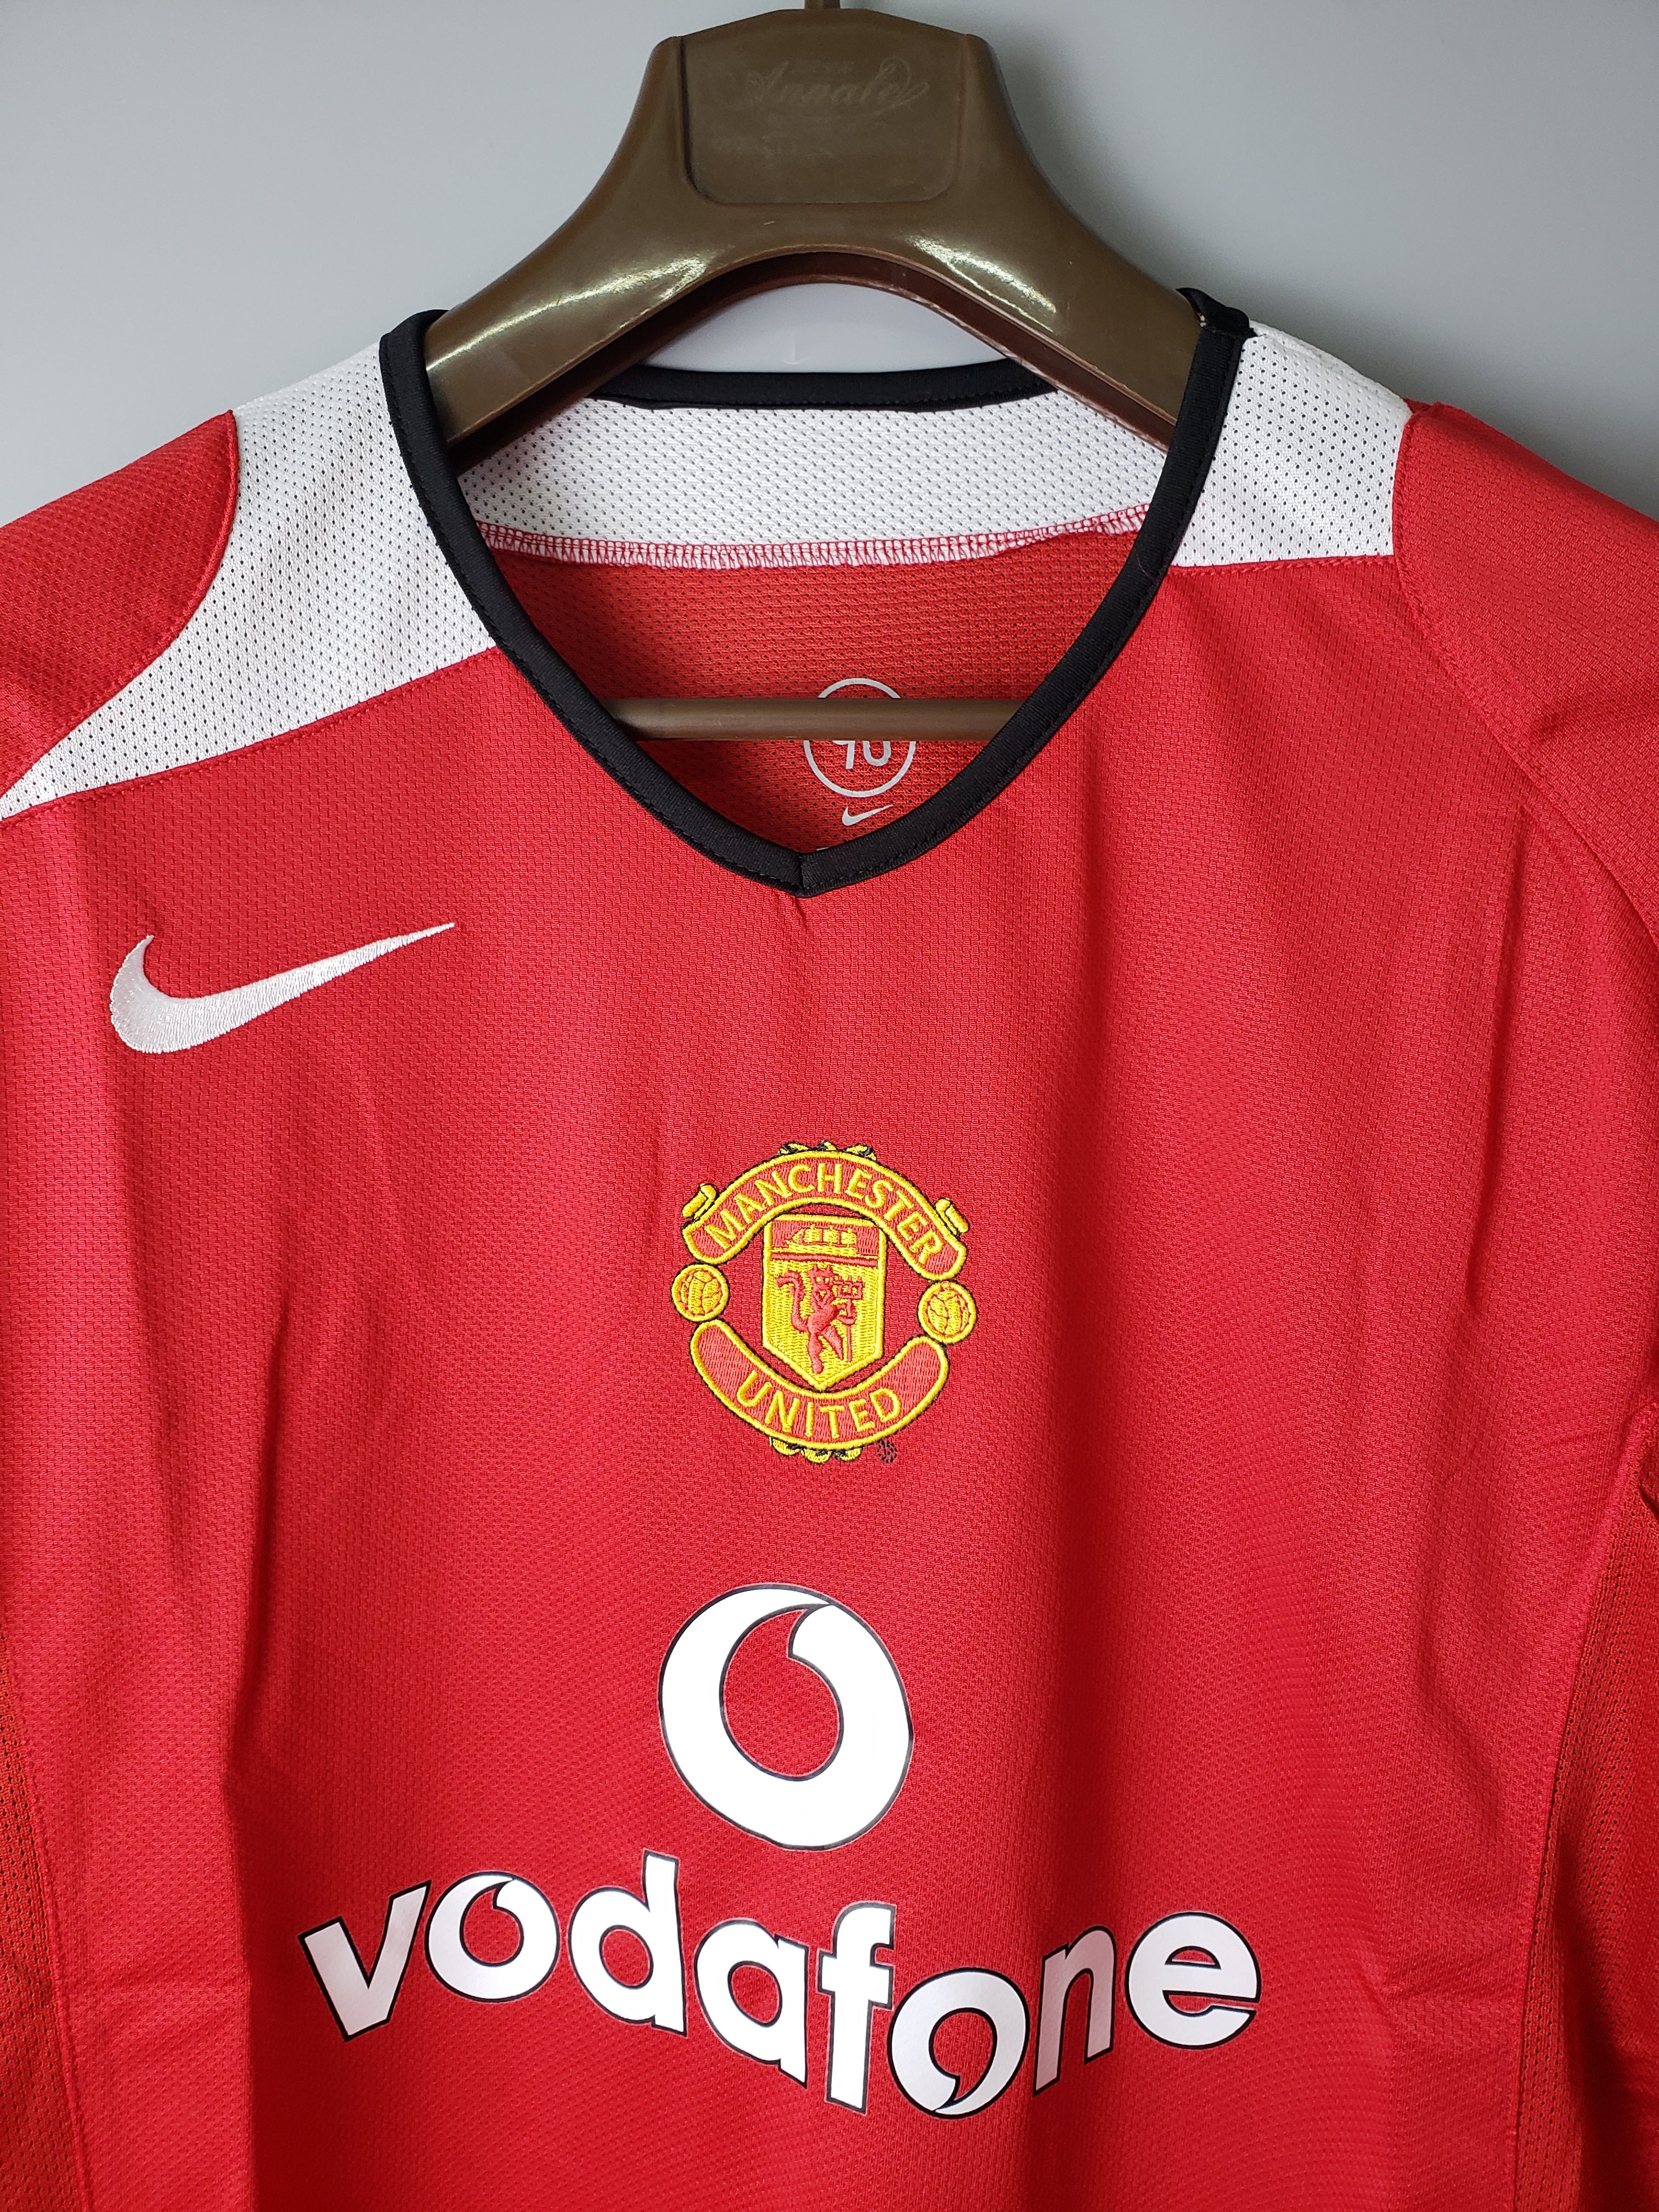 Manchester United 2005-06 Retro Long Sleeve Jersey